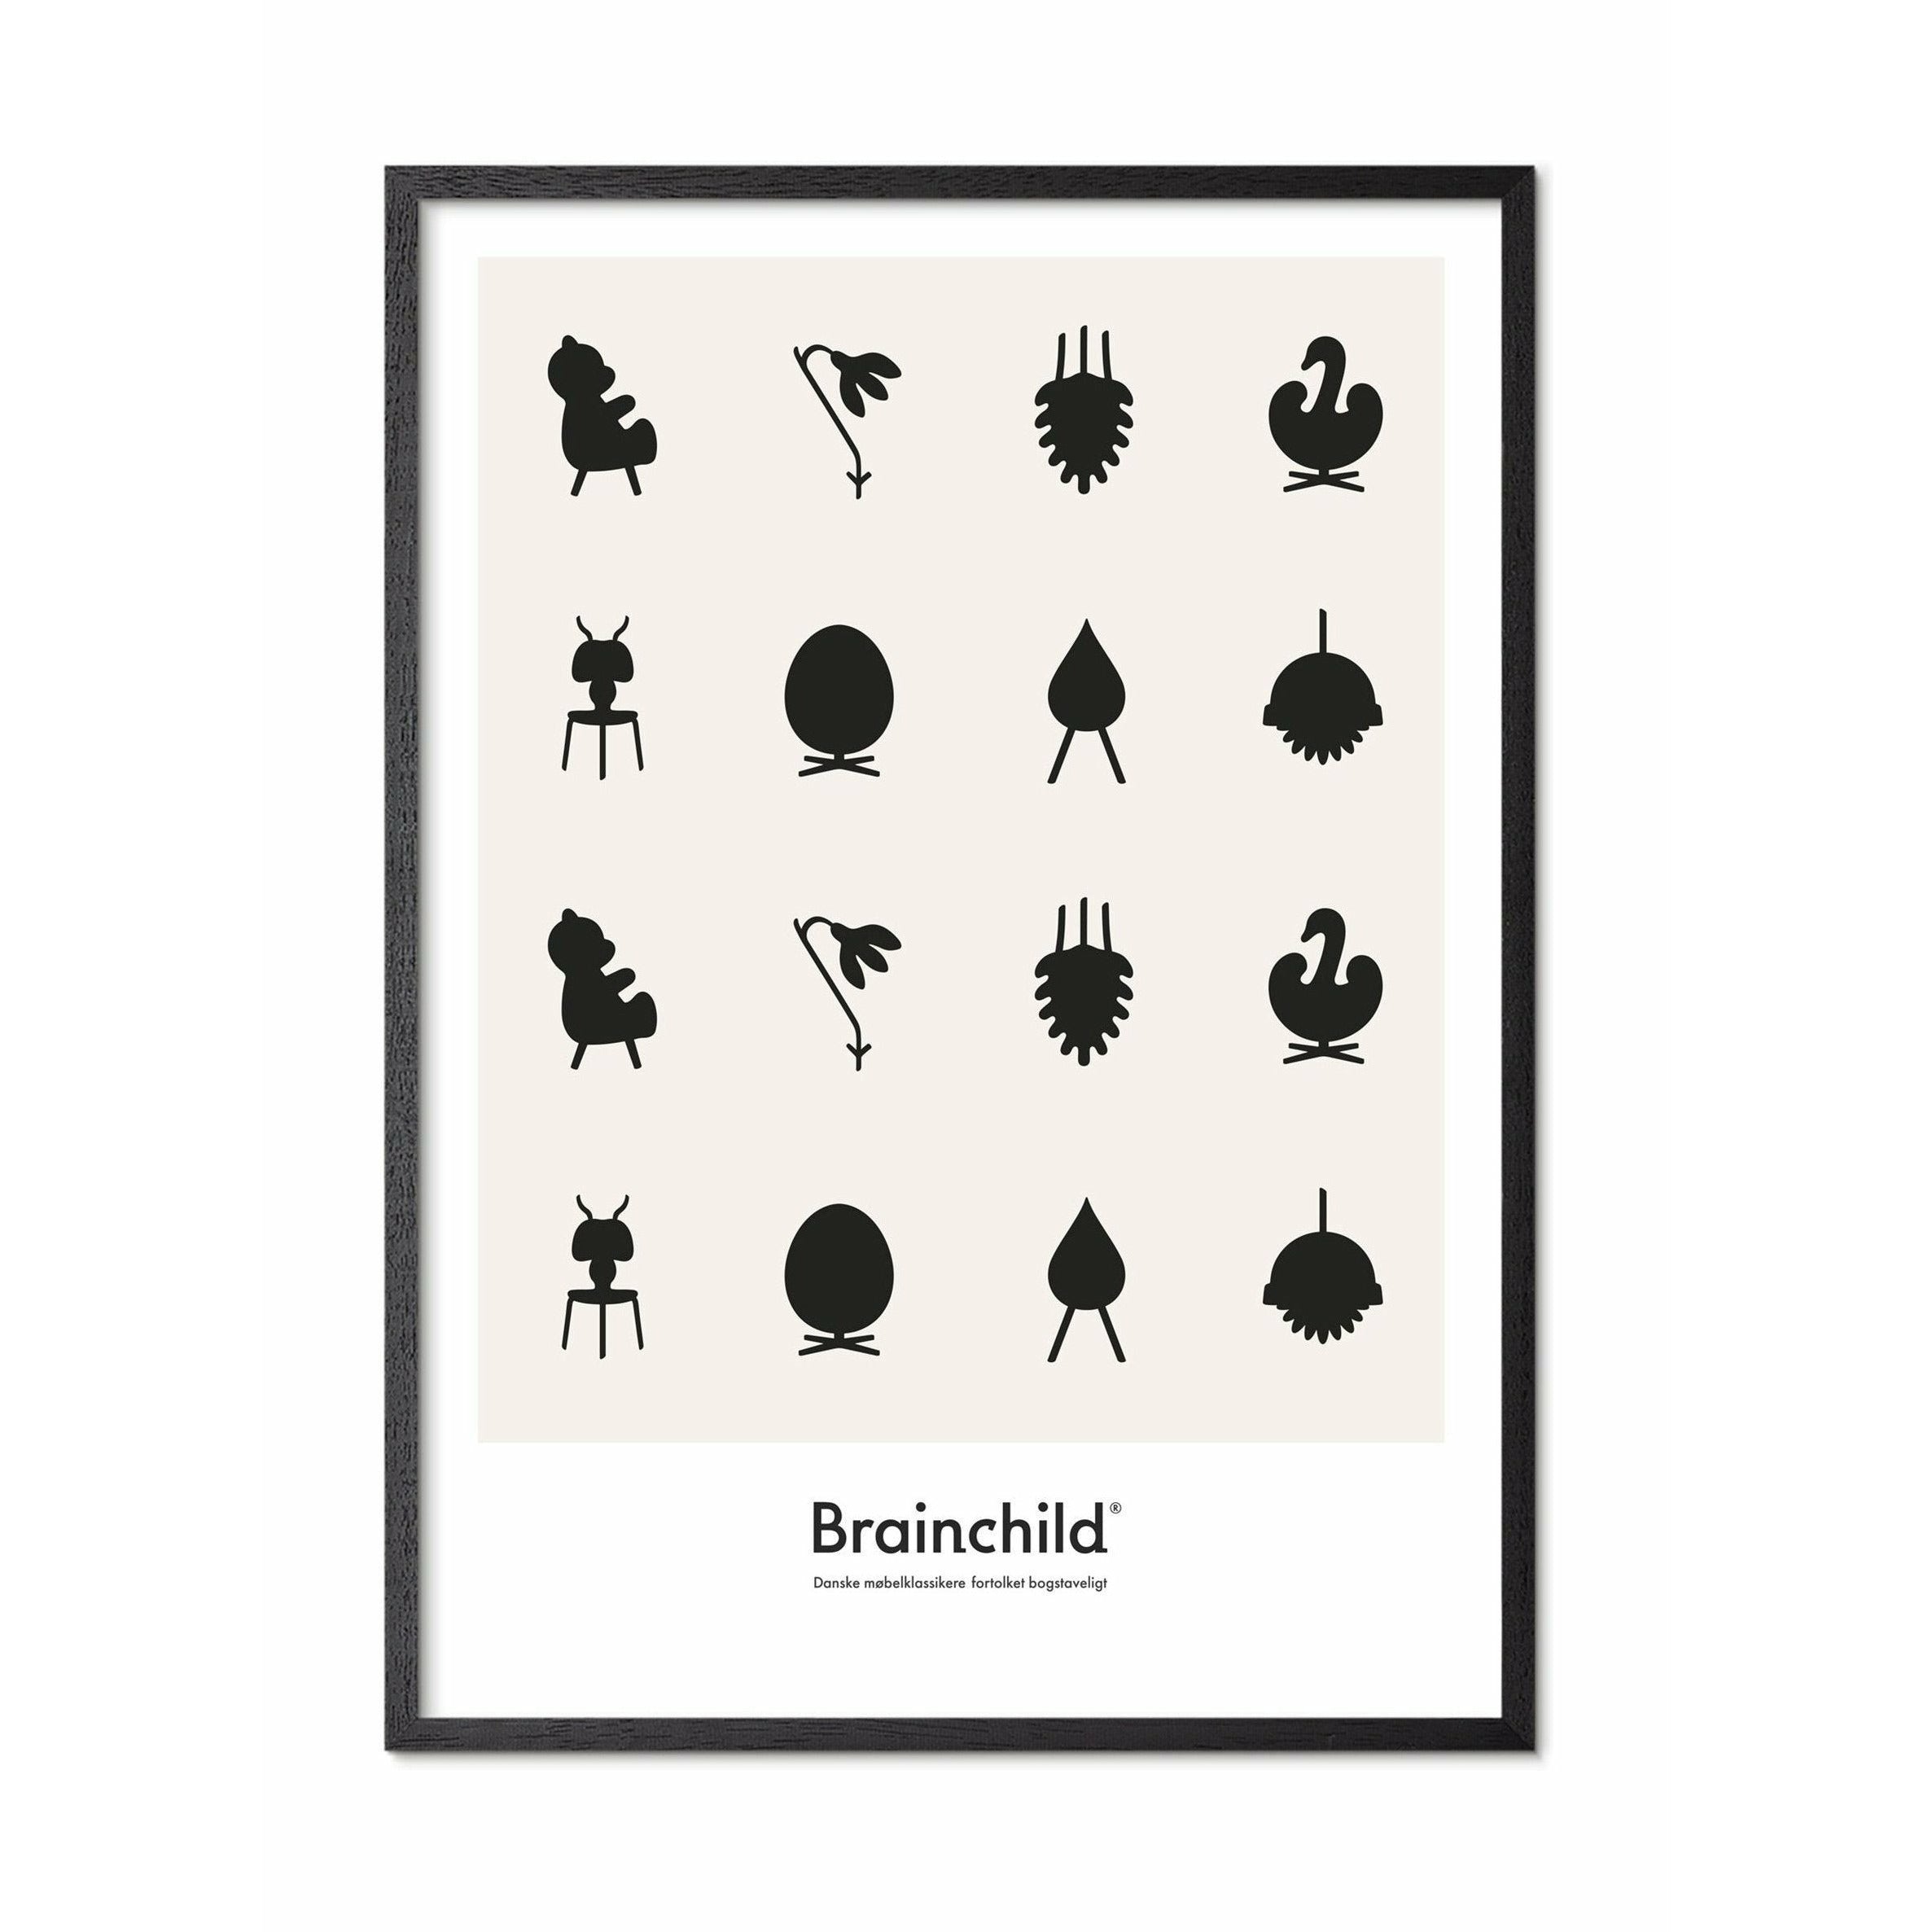 Brainchild Design Icon Poster, Frame Made Of Black Lacquered Wood 50x70 Cm, Grey